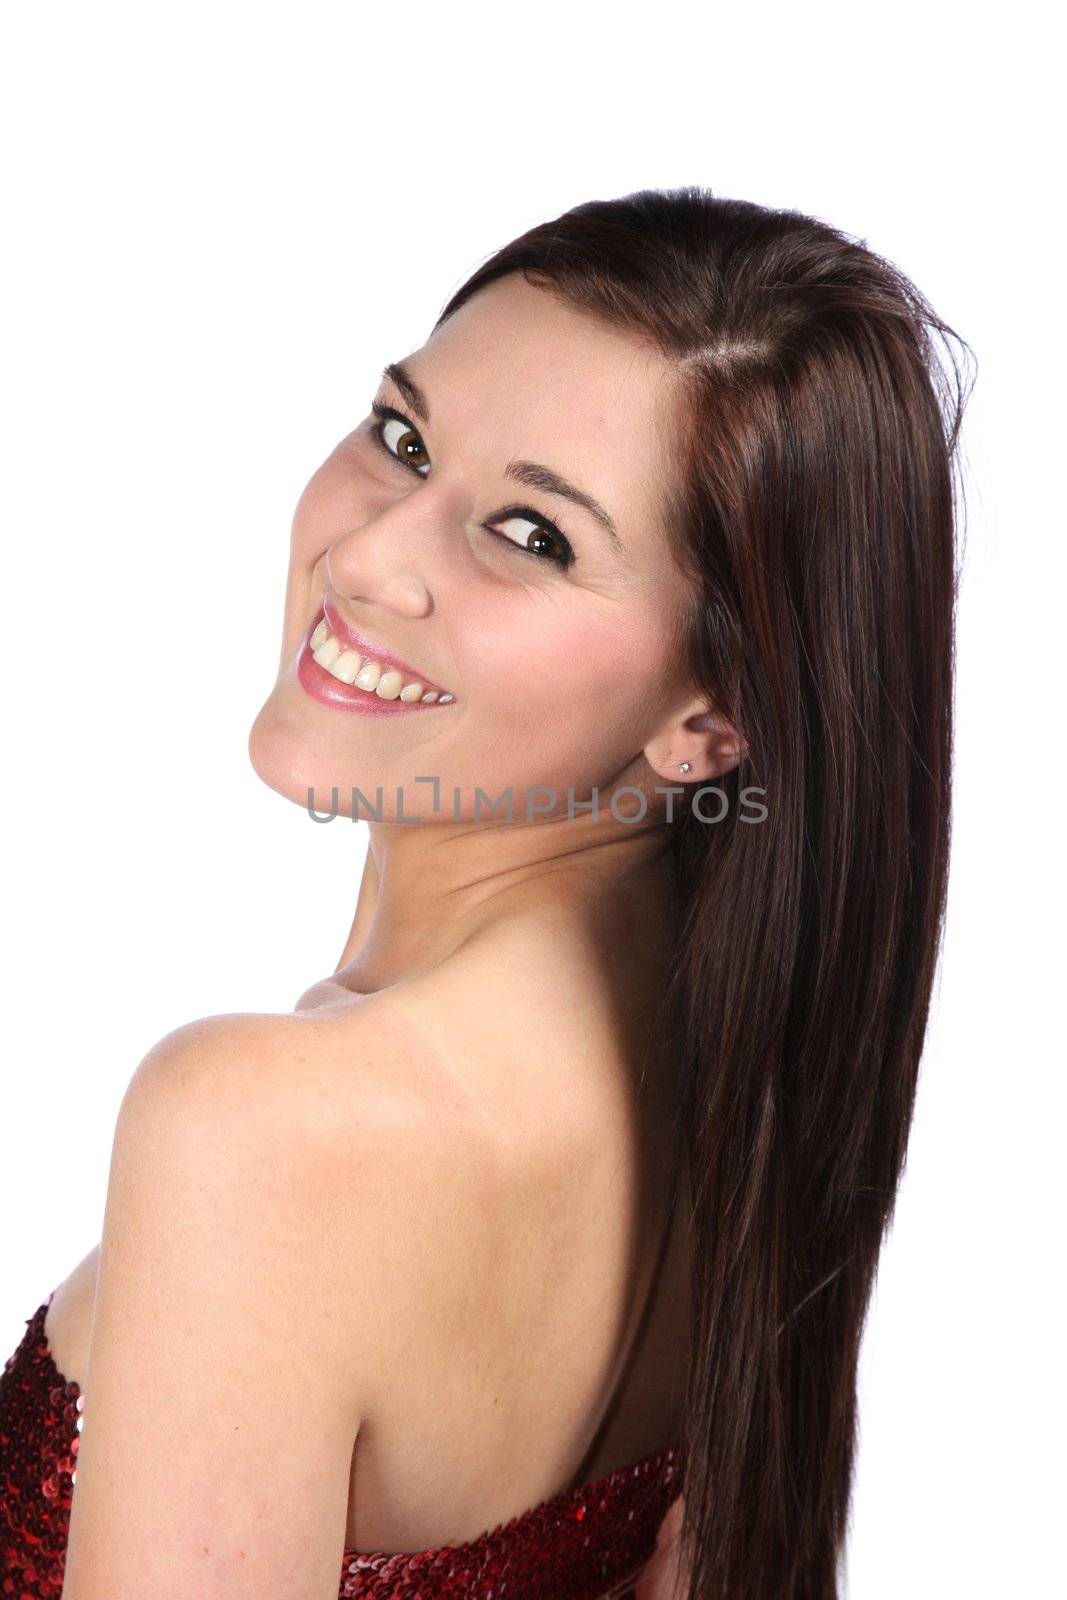 Lovely brunette smiling woman with long hair